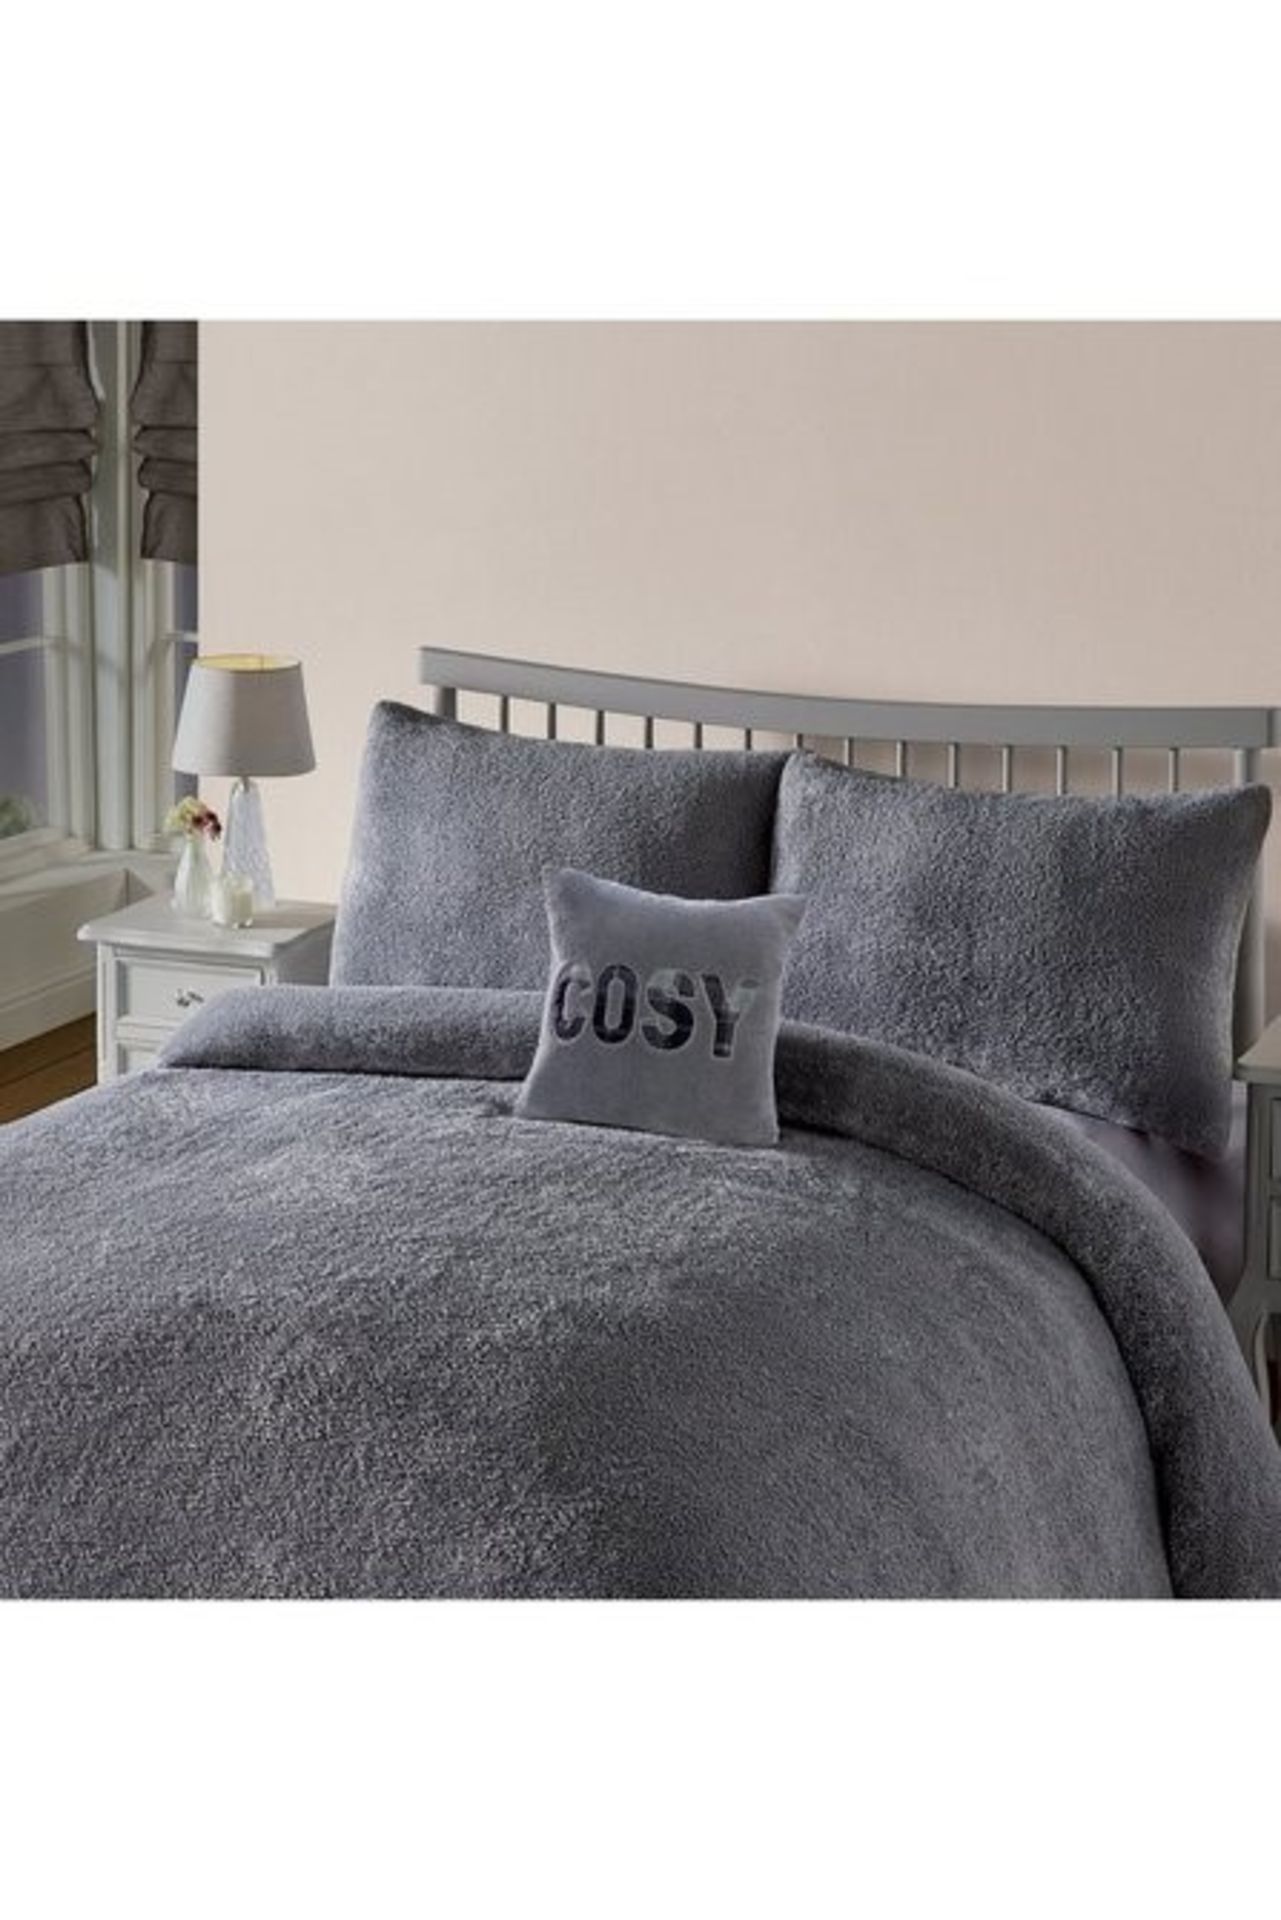 1 AS NEW BAGGED ULTRA COSY TEDDY FLEECE SINGLE DUVET SET IN GREY (VIEWING HIGHLY RECOMMENDED)